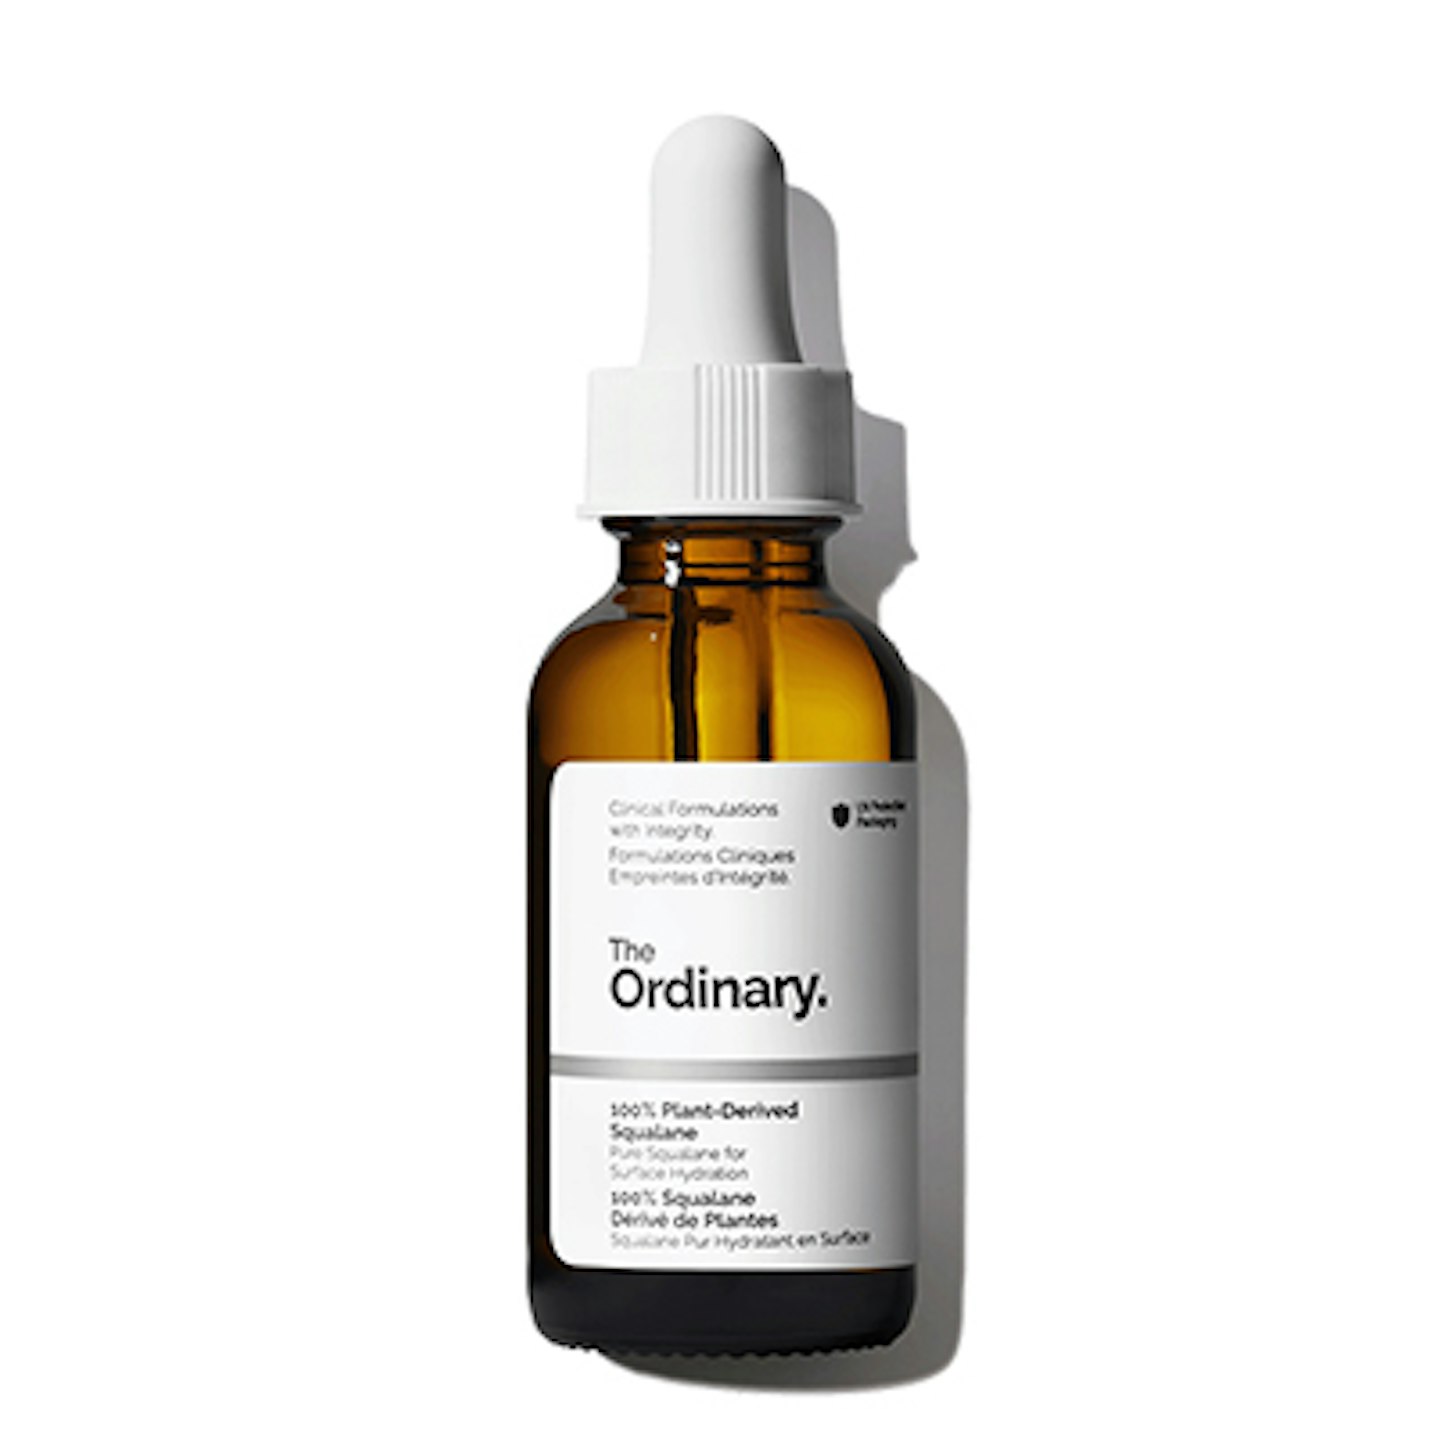 100% Plant-Derived Squalane the ordinary